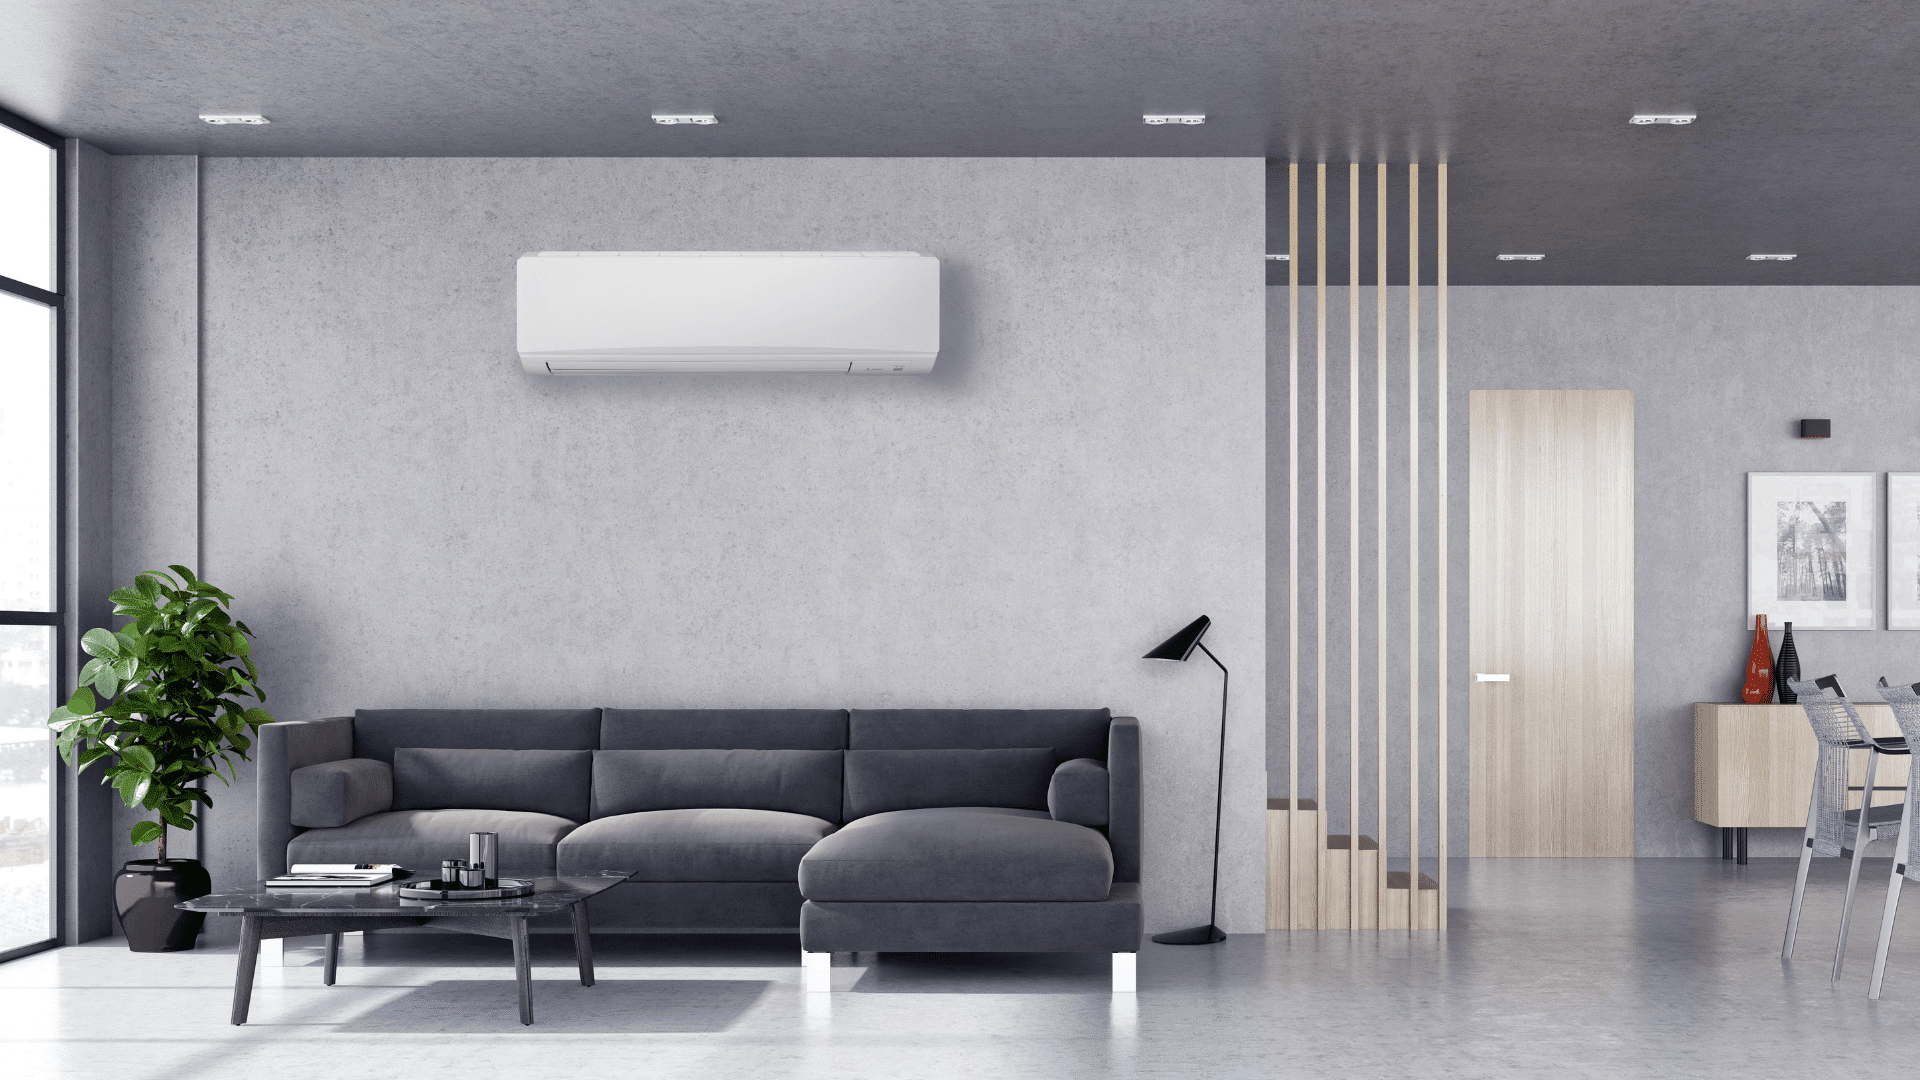 9 Factors to Consider When Buying a Wall-Mounted Air Conditioner